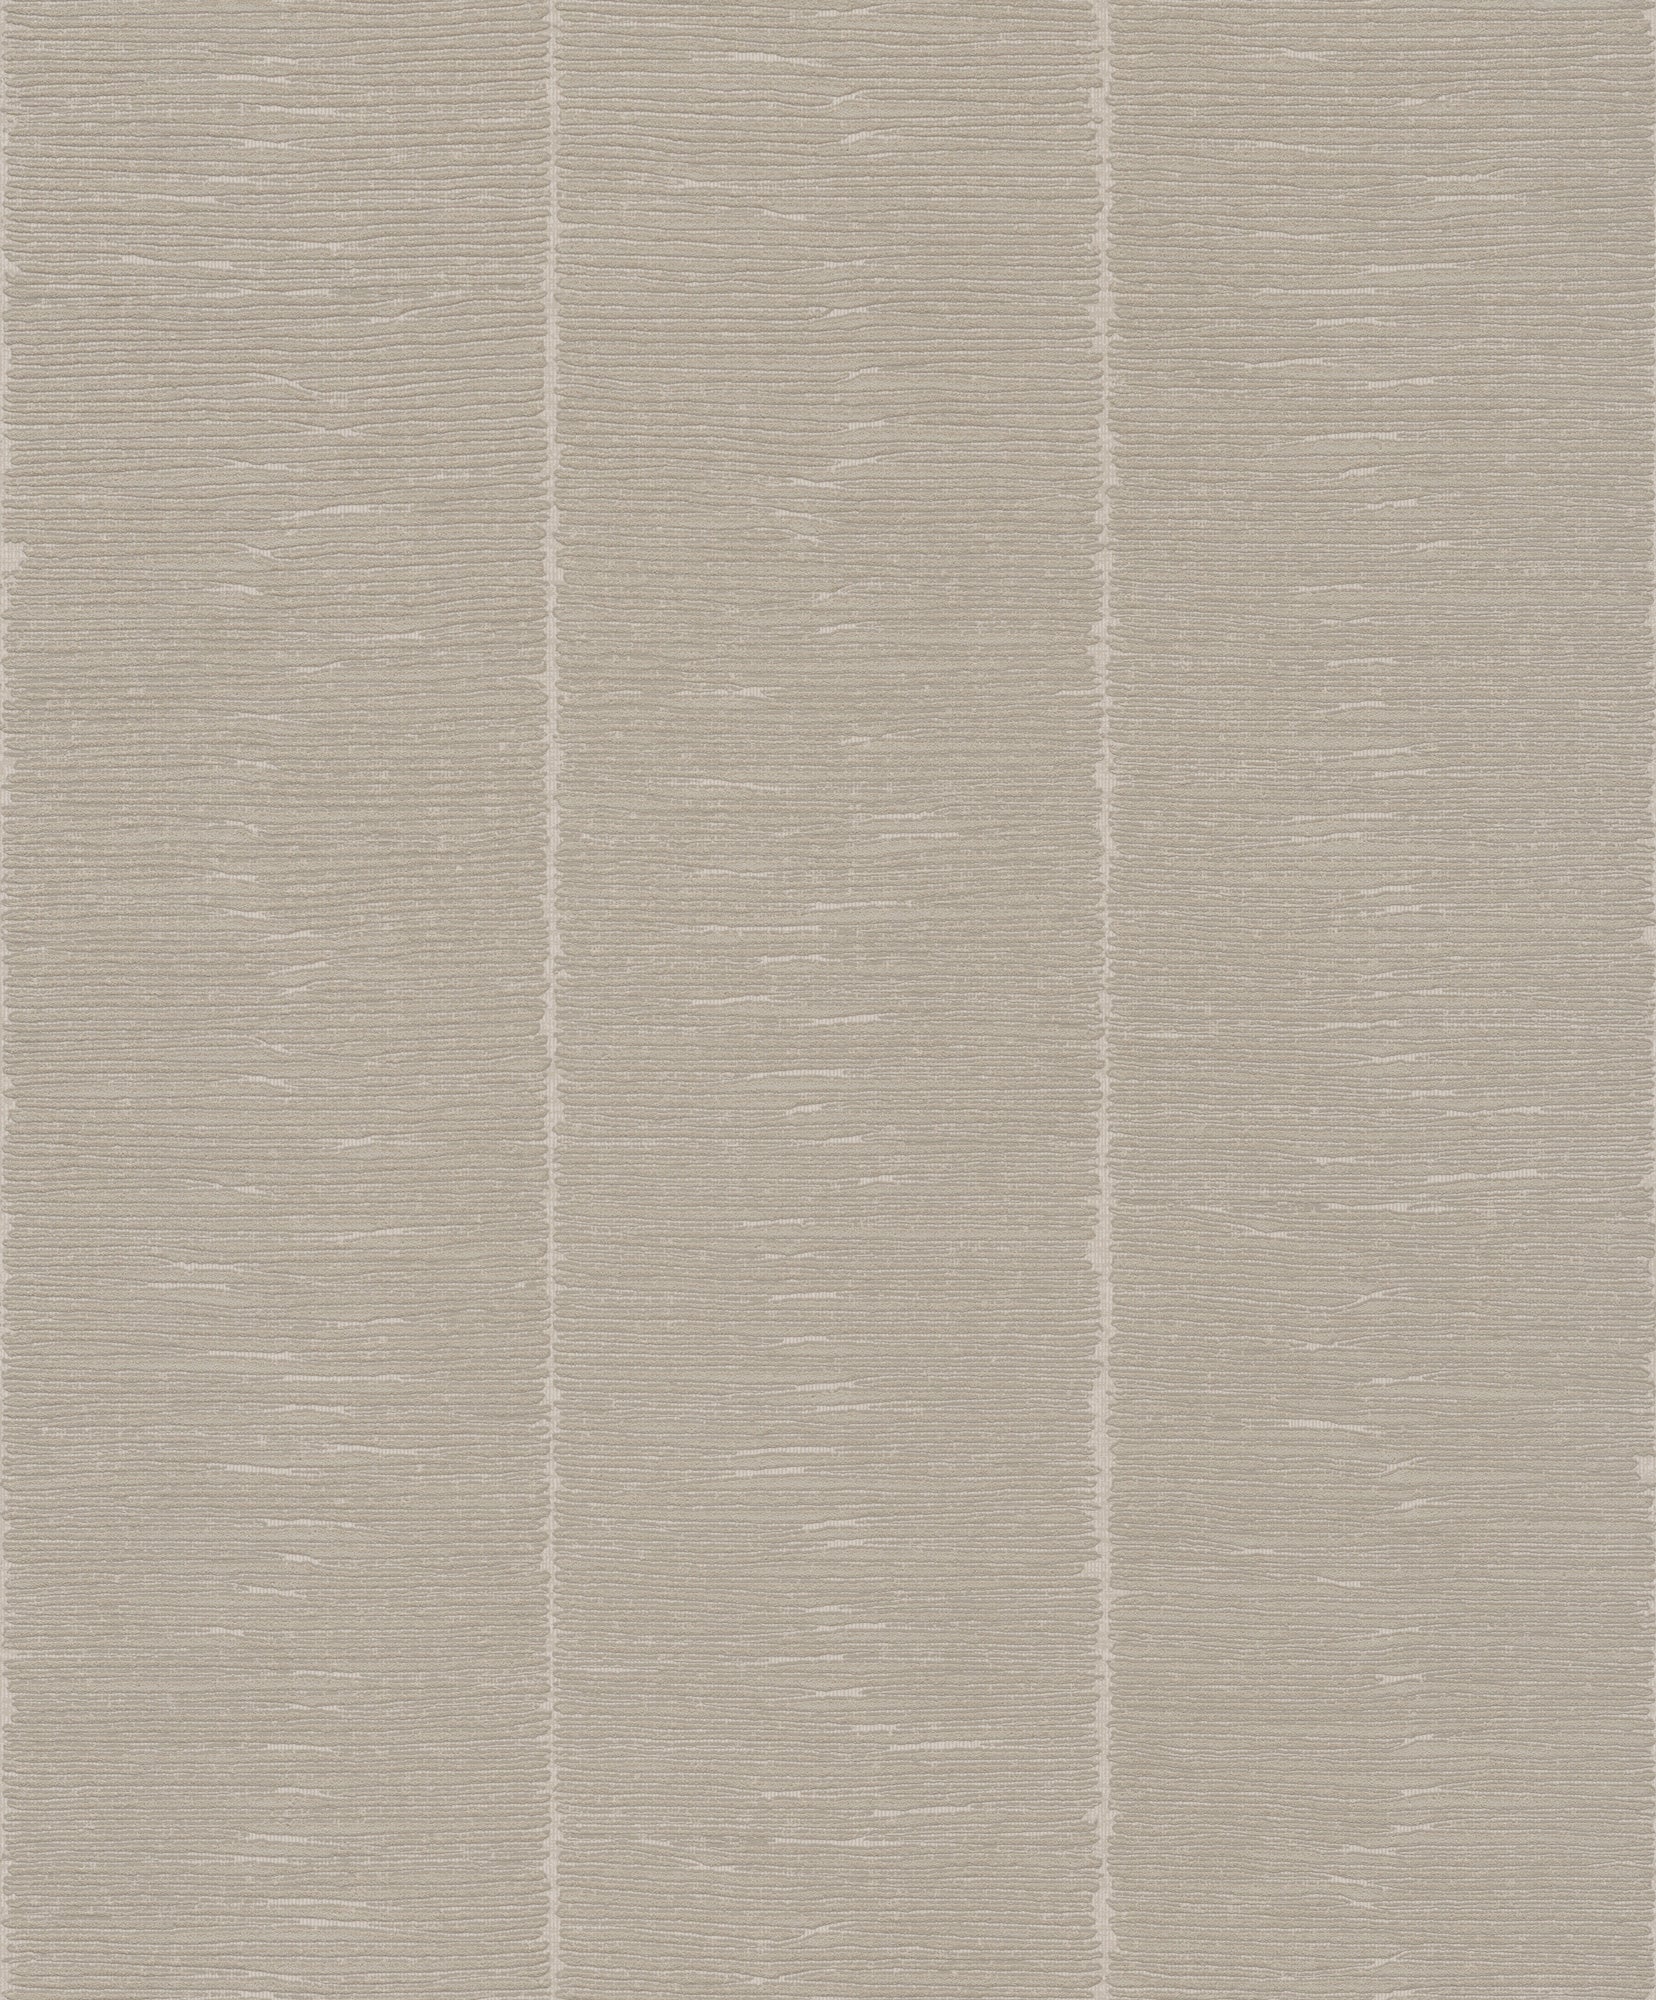 Rustic Bamboo - Light Taupe